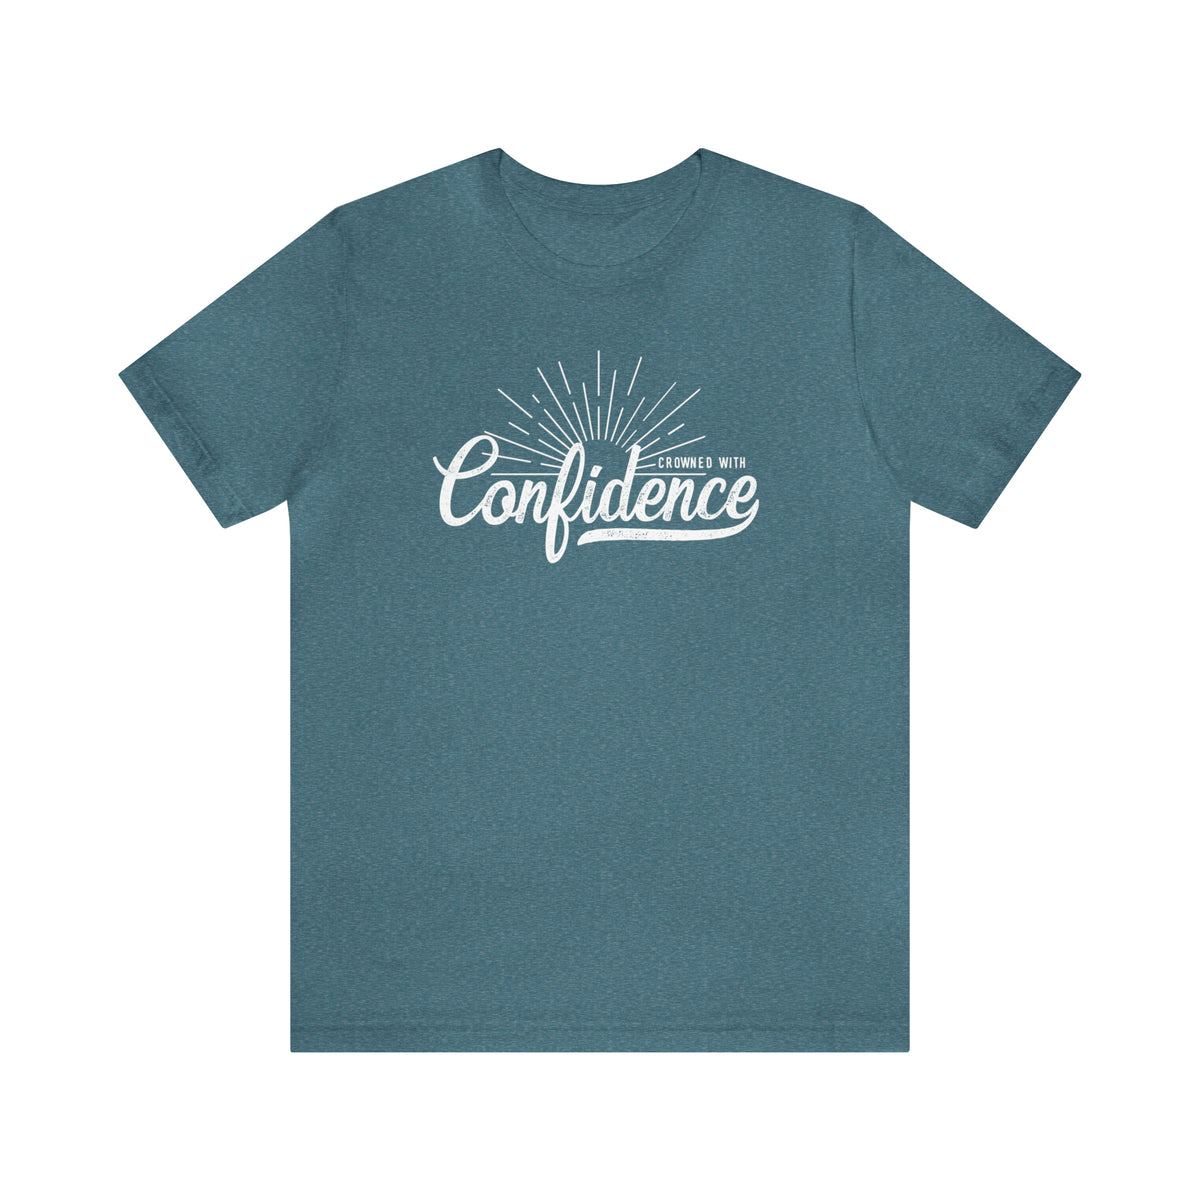 Crowned With Confidence Tee